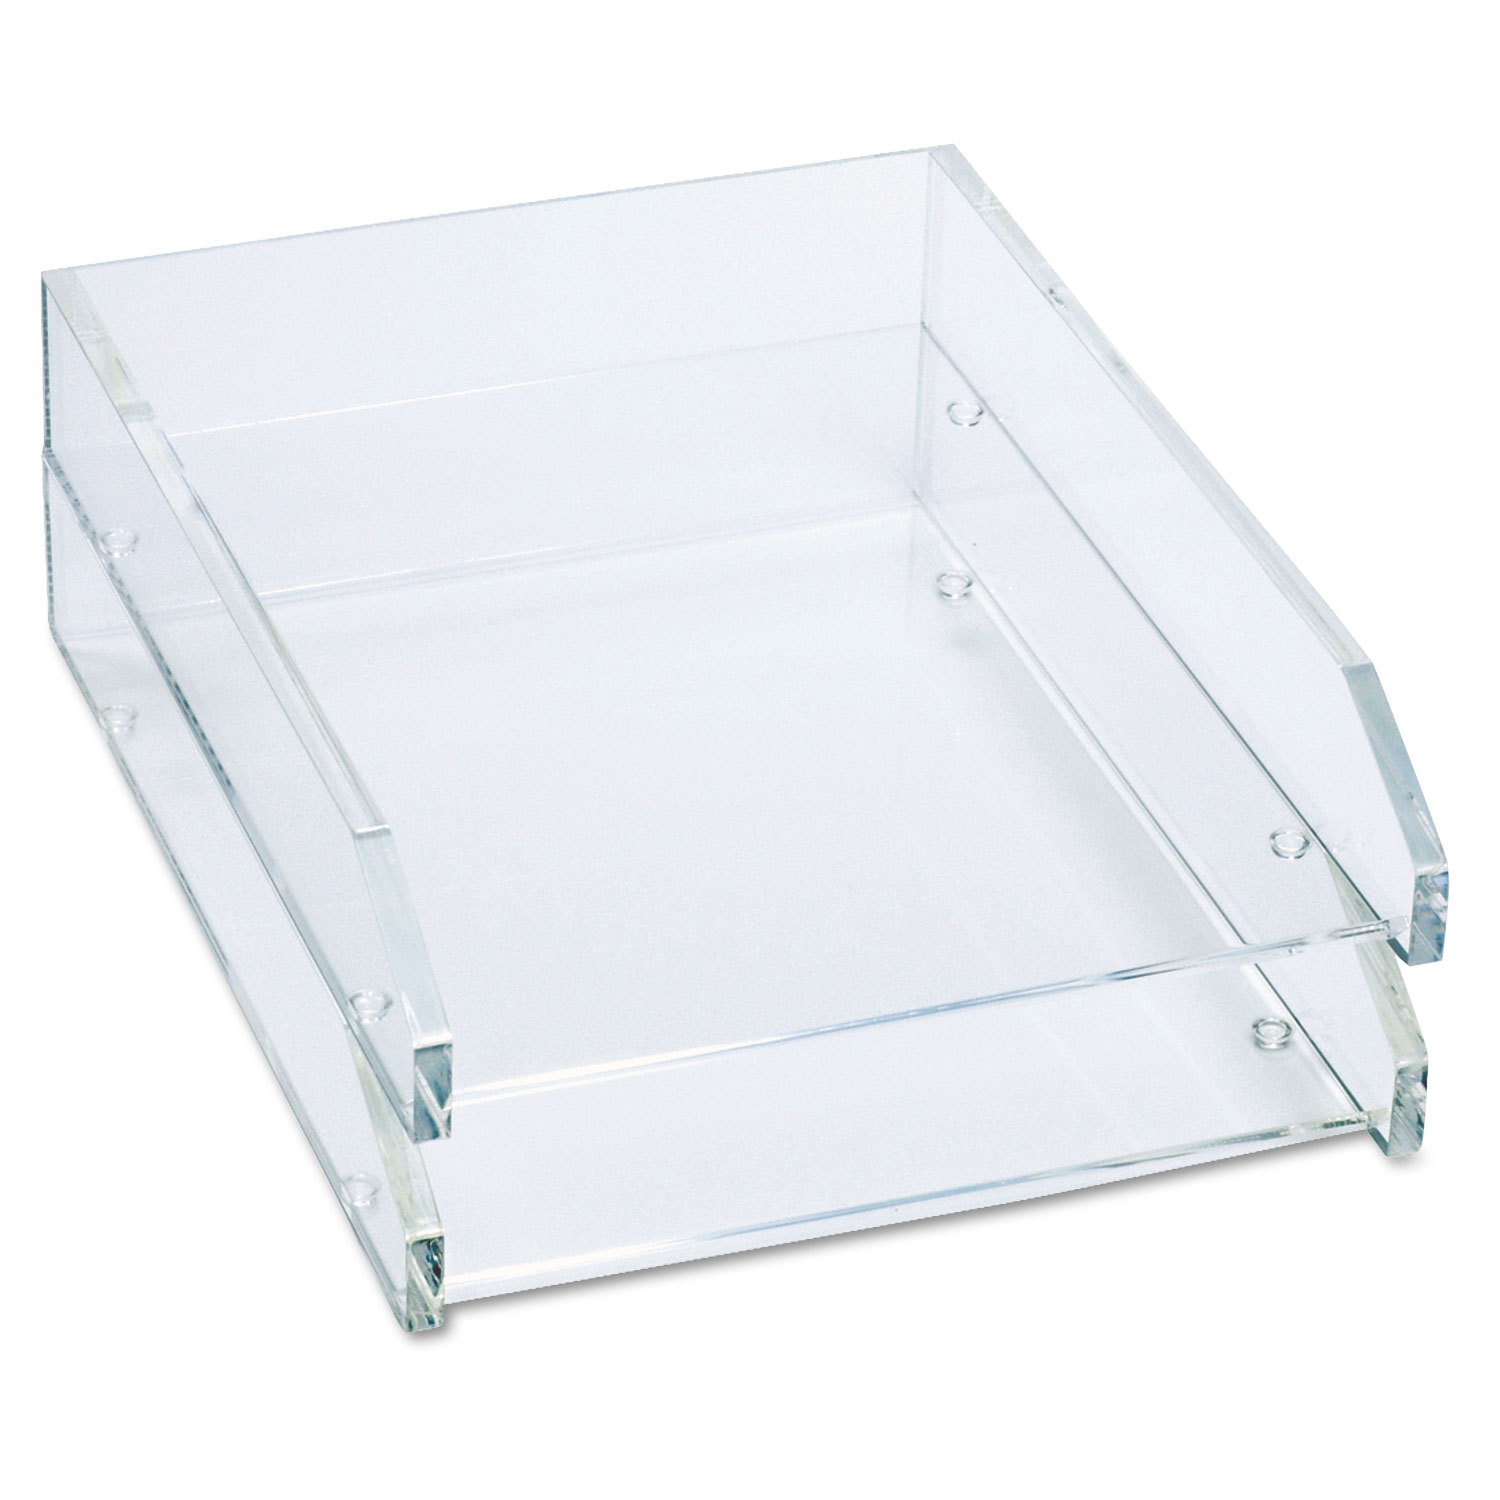  Kantek AD-15 Clear Acrylic Letter Tray, 2 Sections, Letter Size Files, 10.5 x 13.75 x 2.5, Clear, 2/Pack (KTKAD15) 